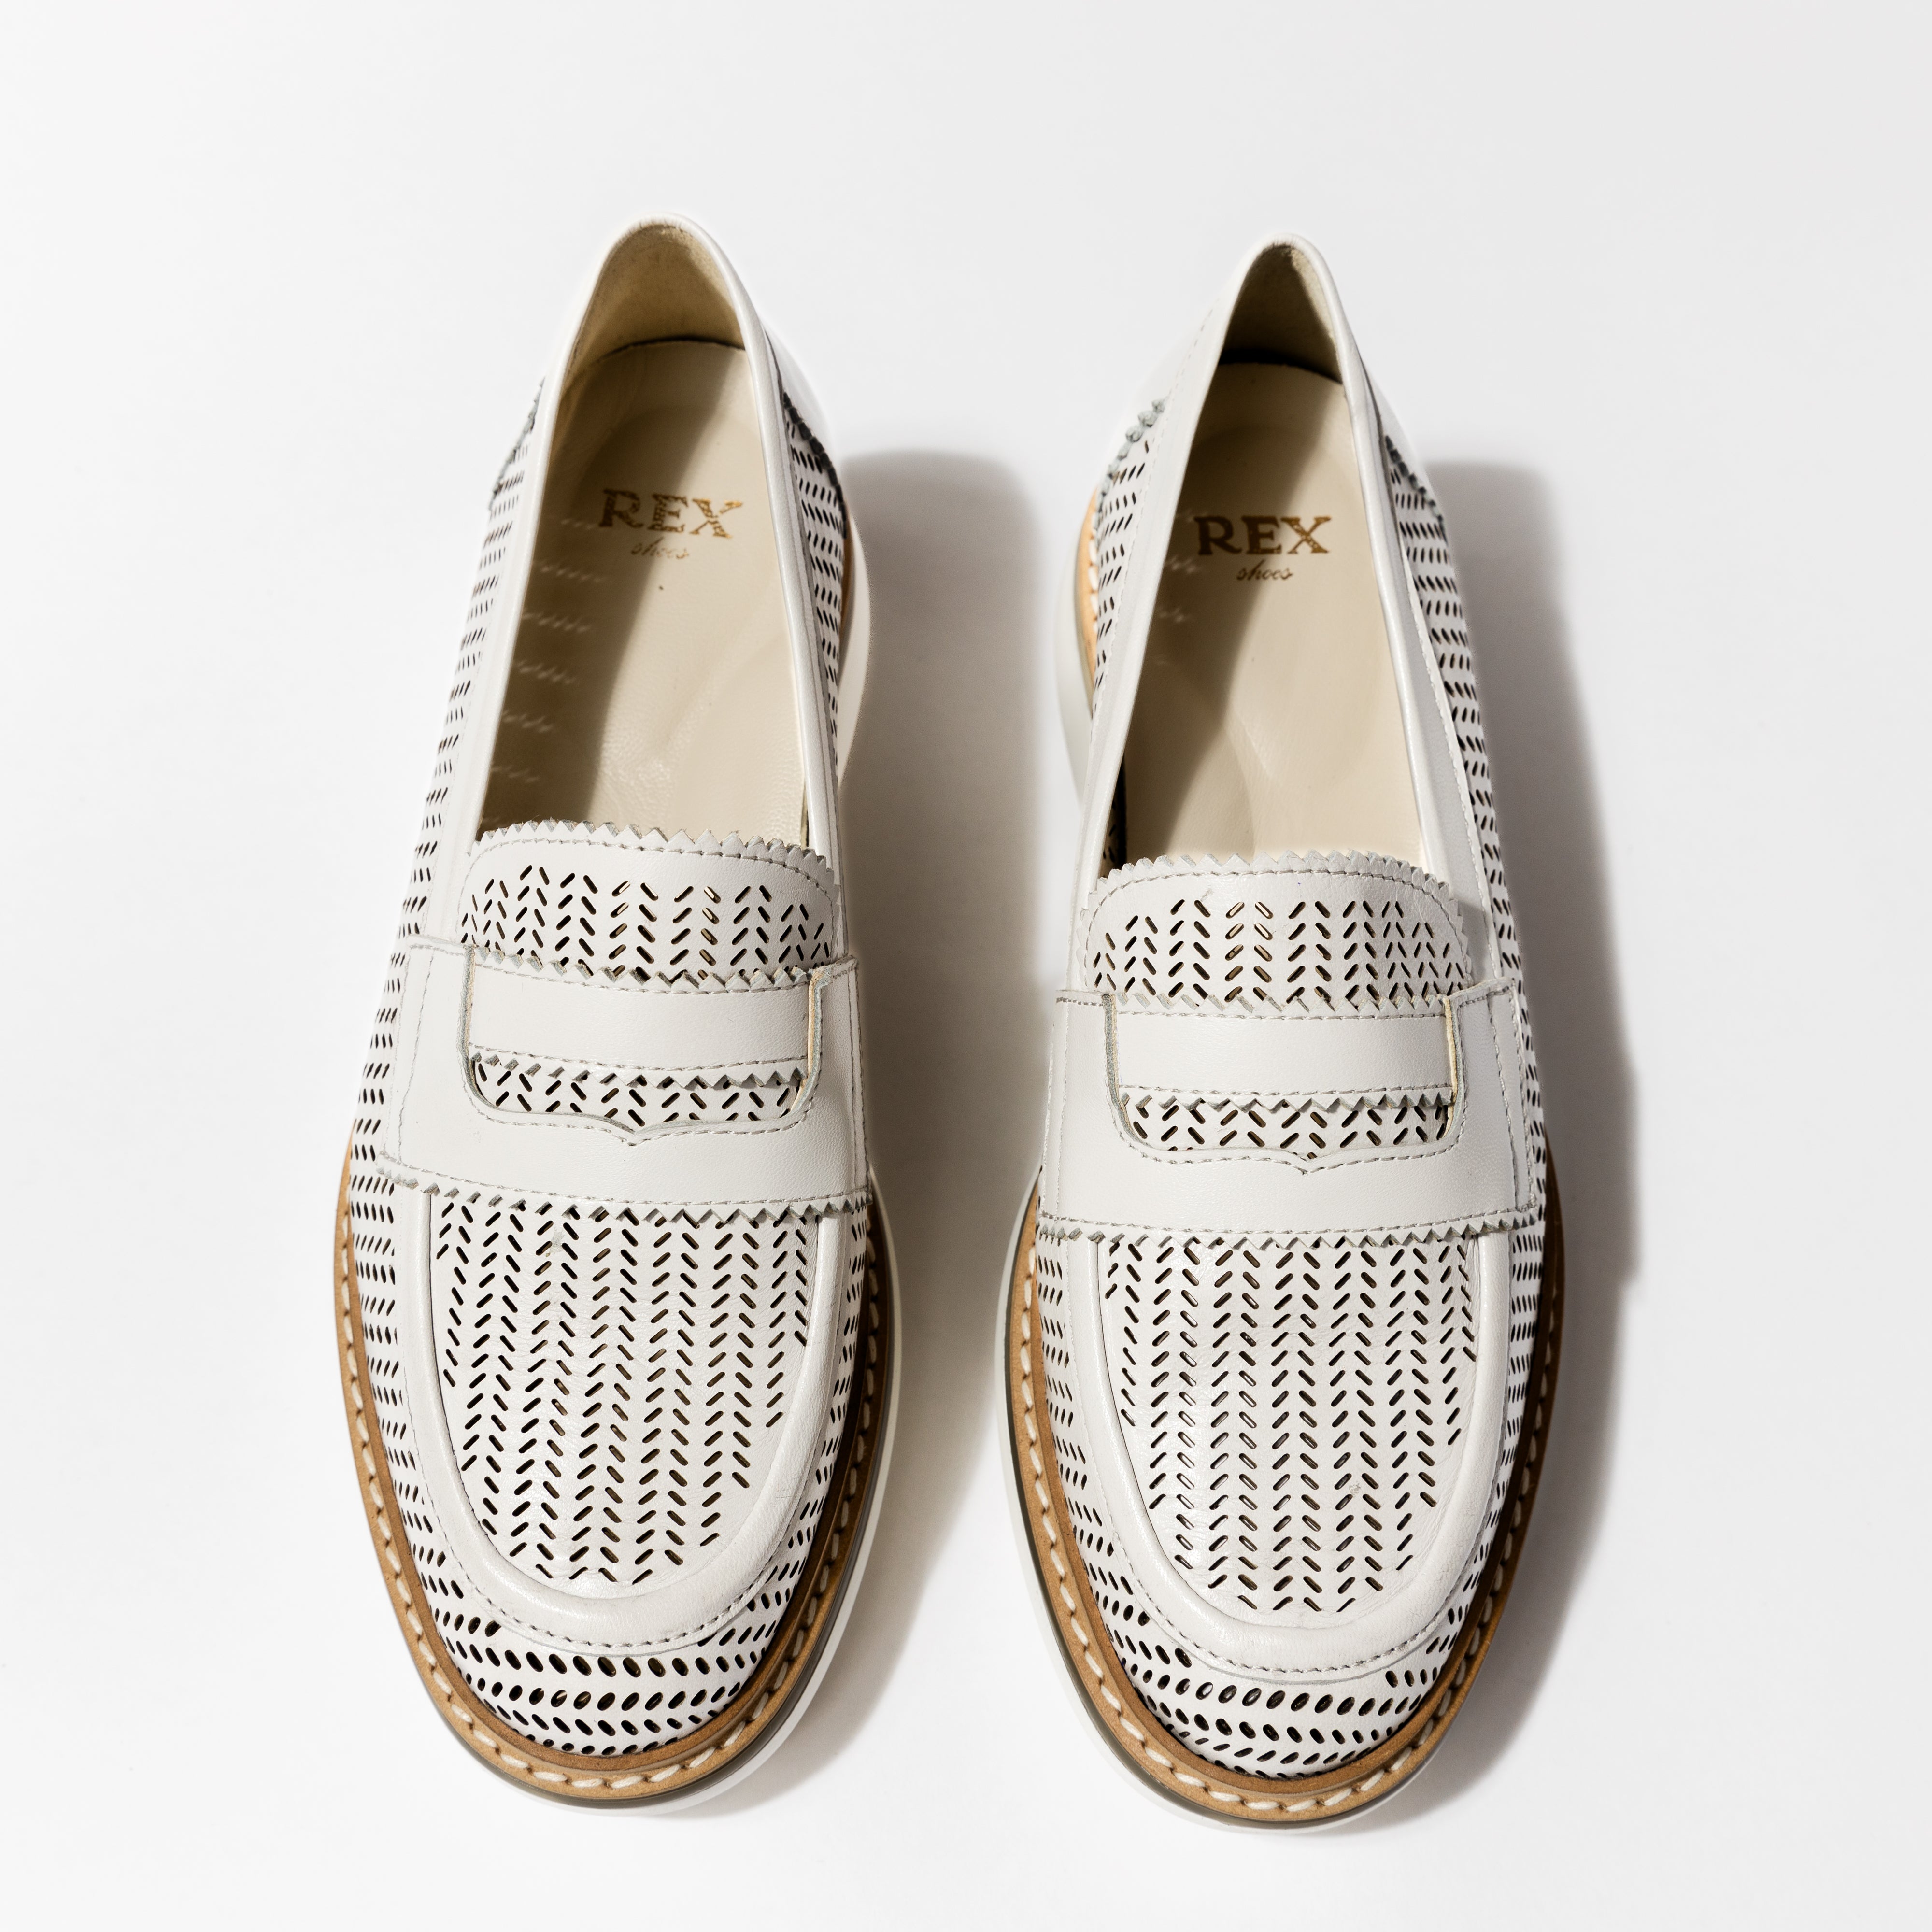 Overhead view of the &#39;Lauren&#39; luxury loafers in Panna Leather, displaying the pristine white perforated design and elegant strap detail, by Rex Shoes.